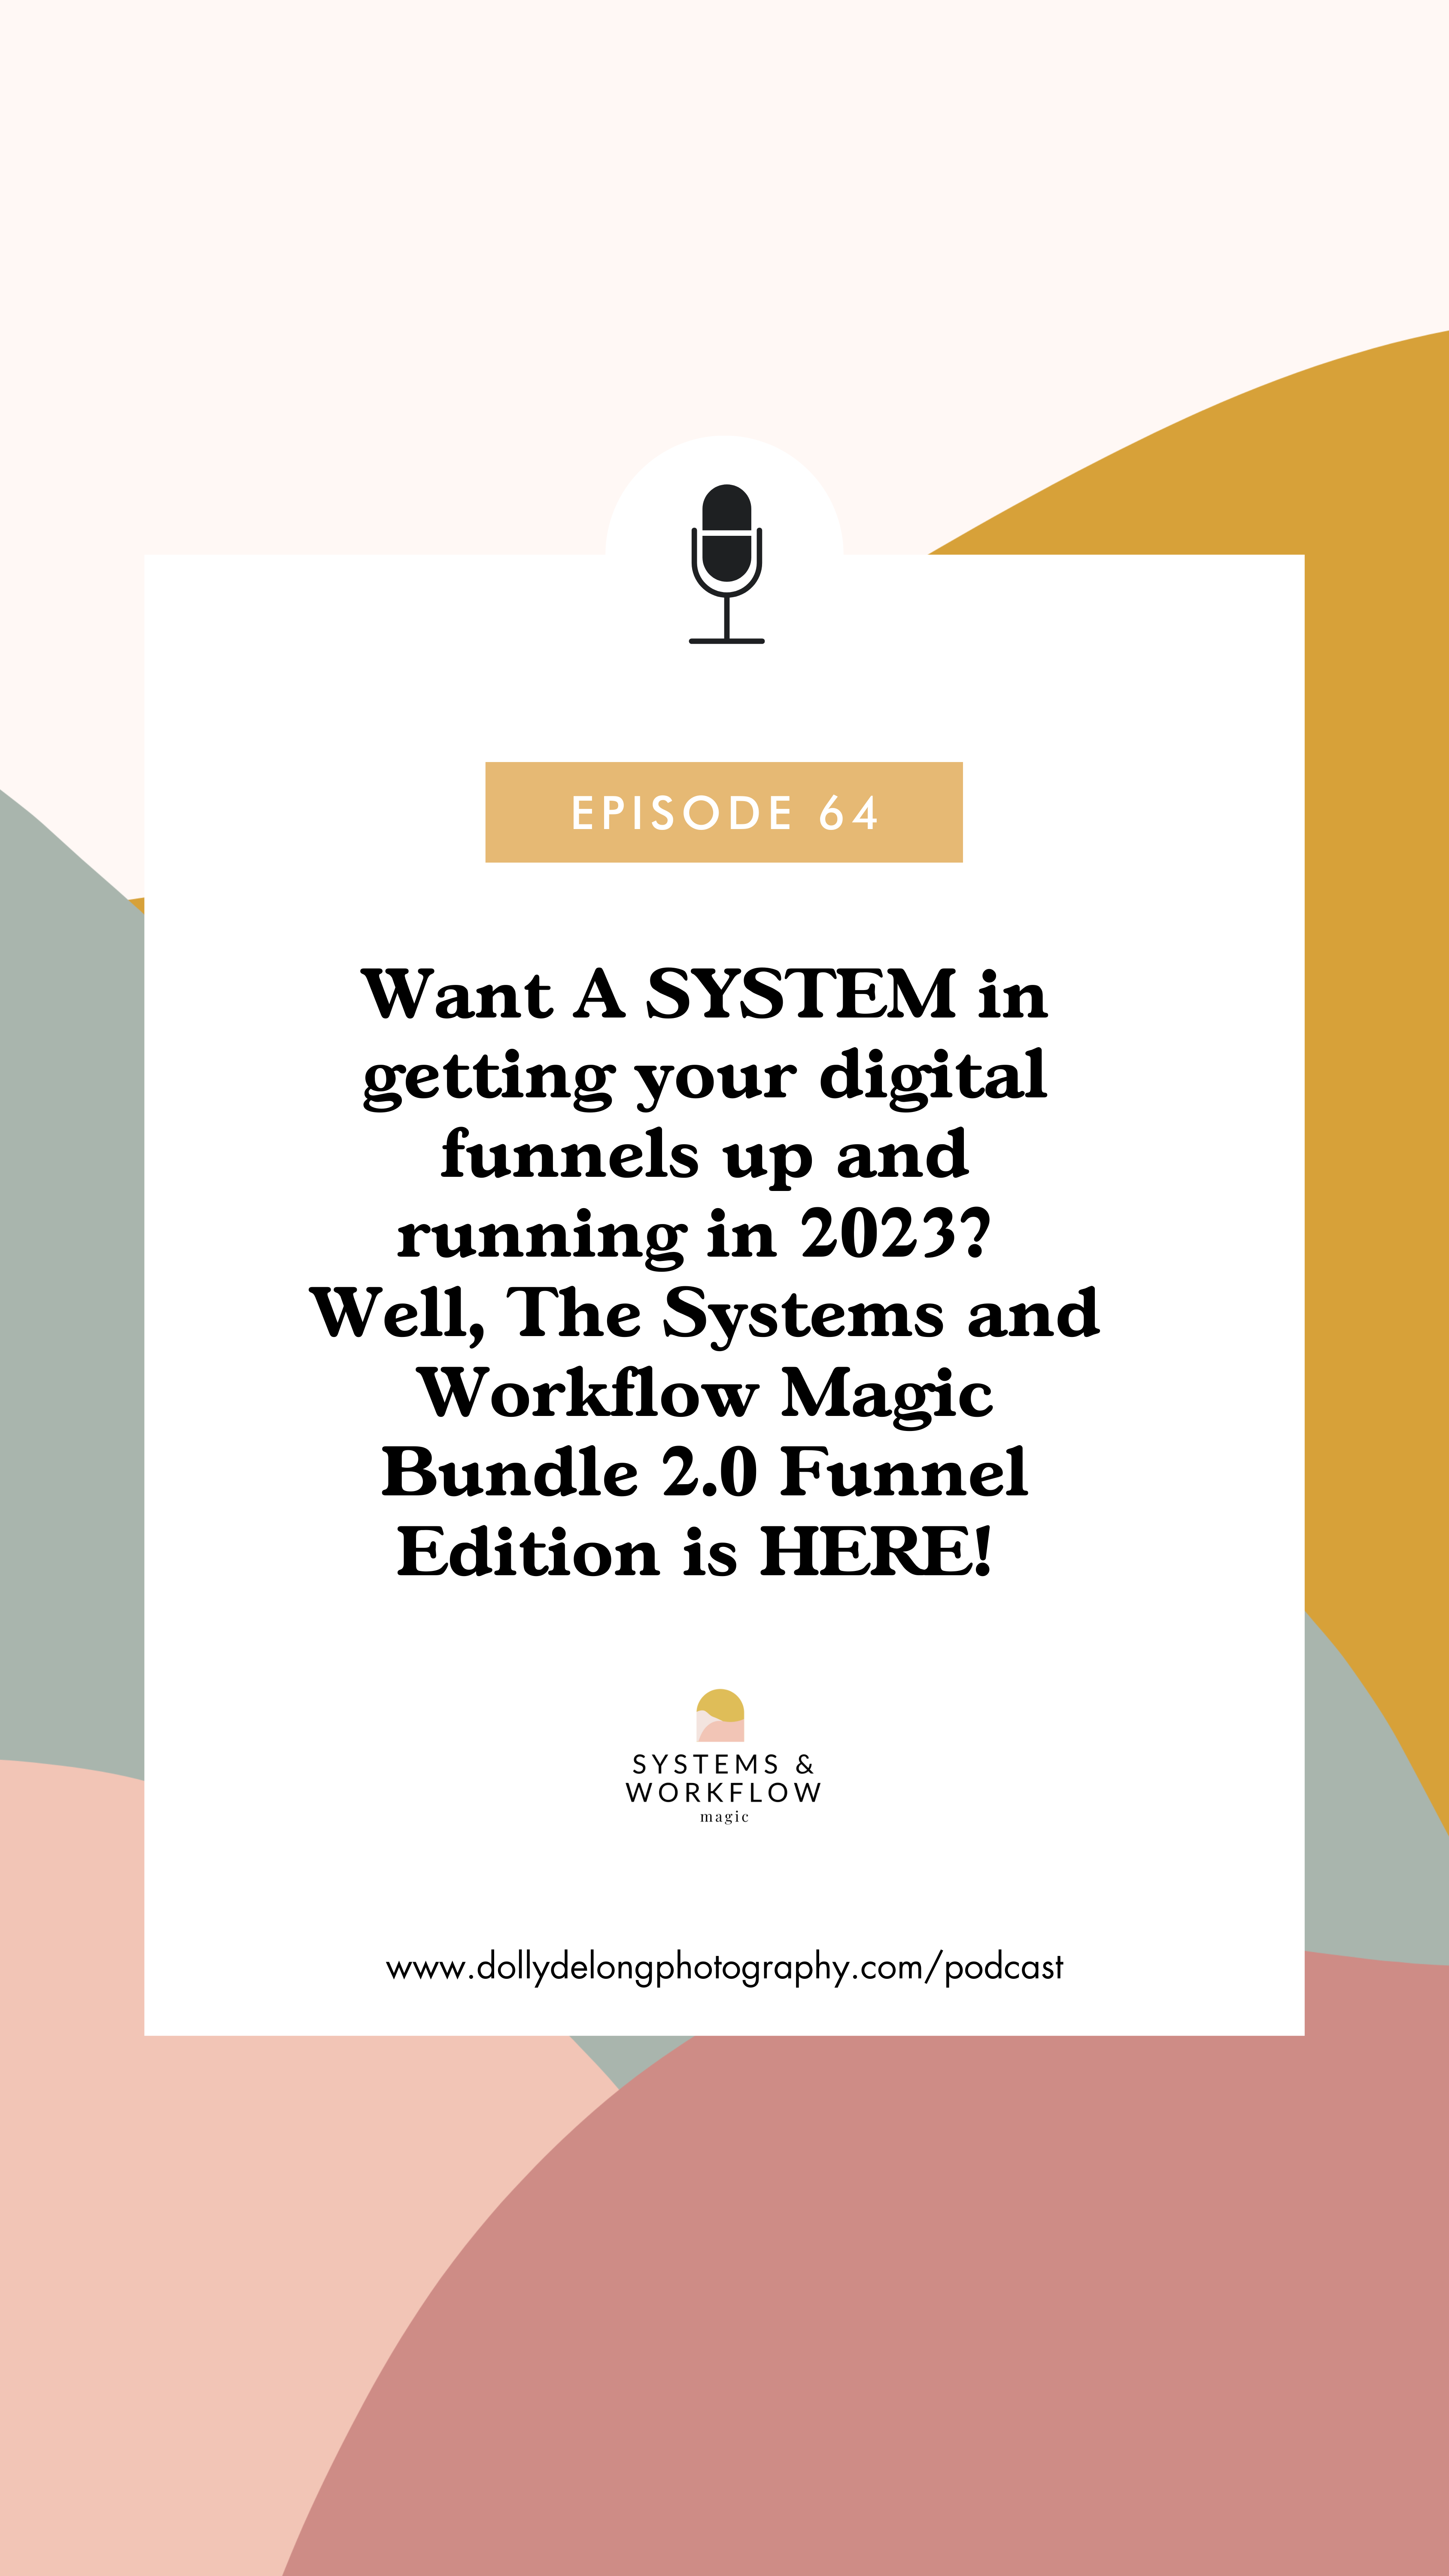 Want-A-SYSTEM-in-getting-your-digital funnels-up-and-running-in-2023?-Well-The Systems-and-Workflow-Magic-Bundle-2.0-Funnel Edition-is-HERE! 